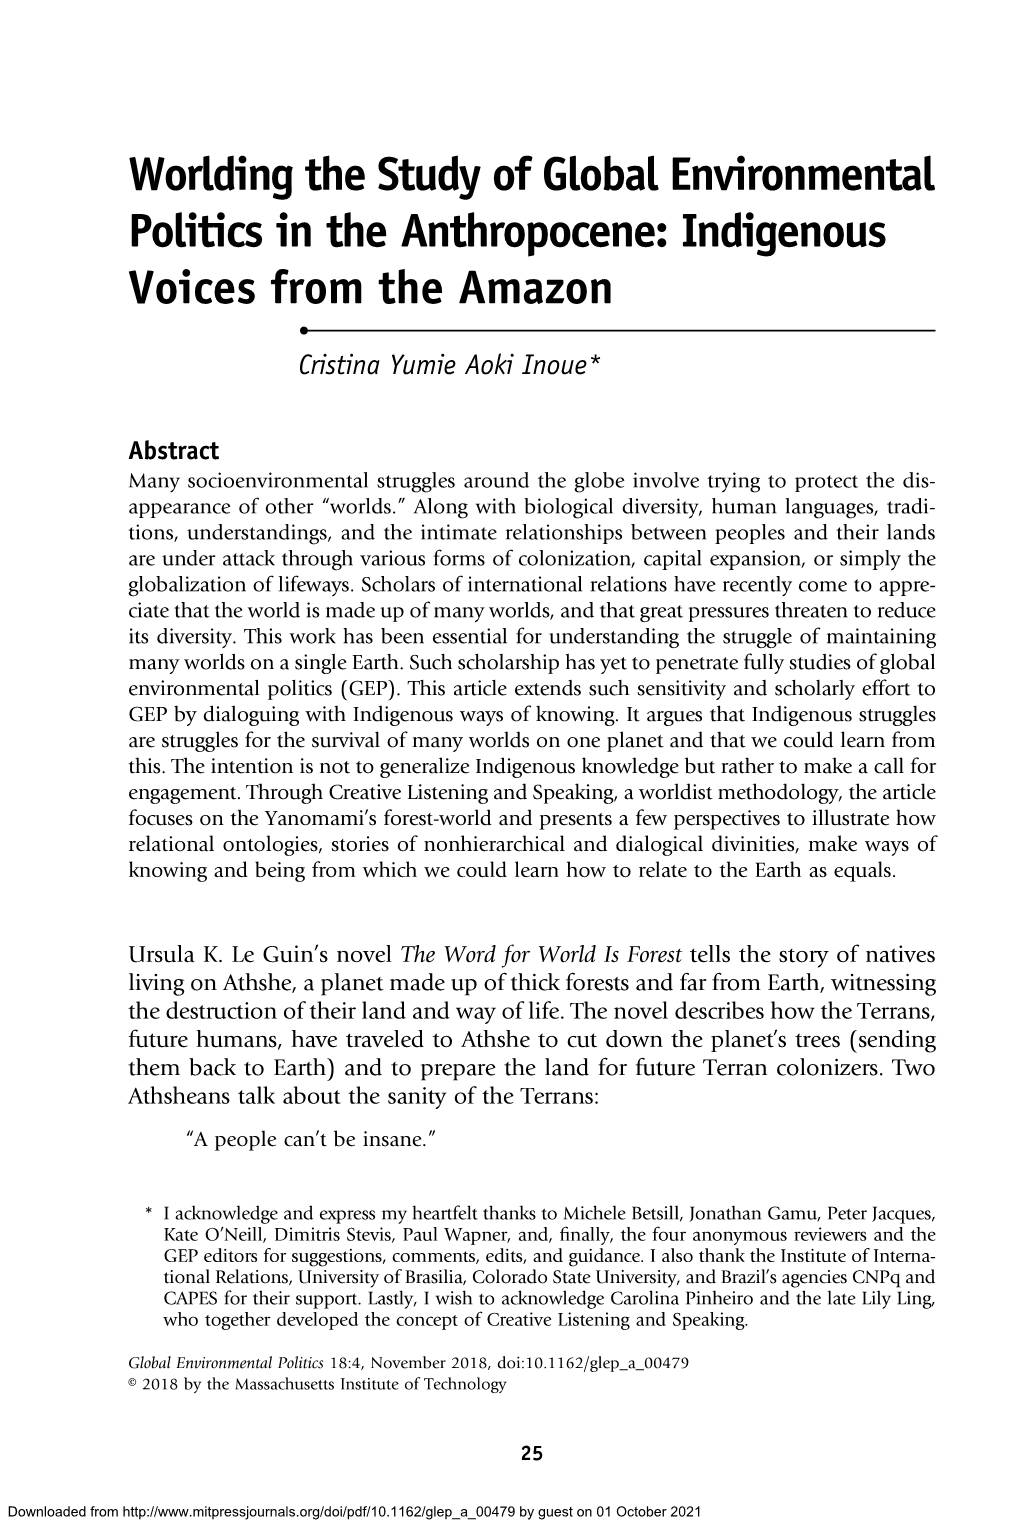 Worlding the Study of Global Environmental Politics in the Anthropocene: Indigenous Voices from the Amazon • Cristina Yumie Aoki Inoue*